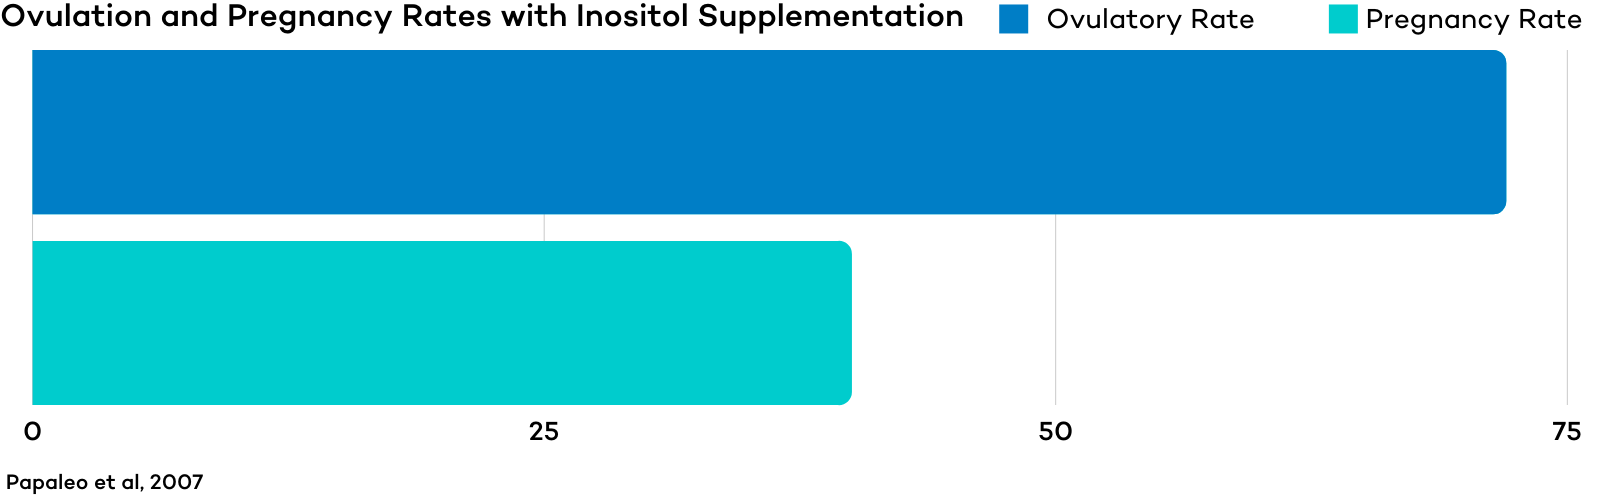 Ovulation and Pregnancy Rates with Inositol Supplementation